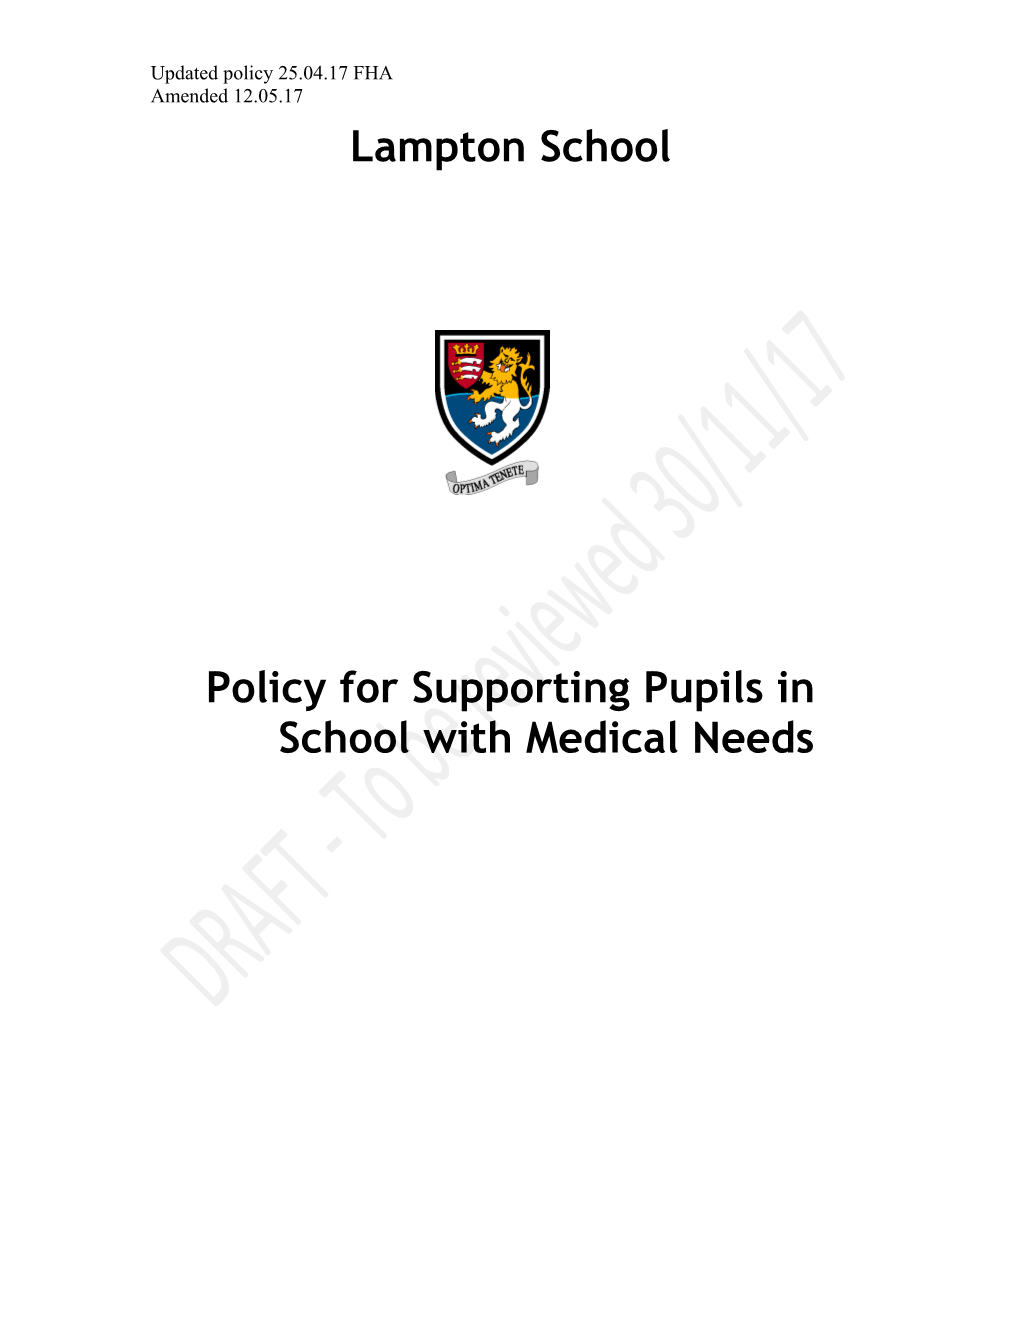 Policy for Supporting Pupils in School with Medical Needs